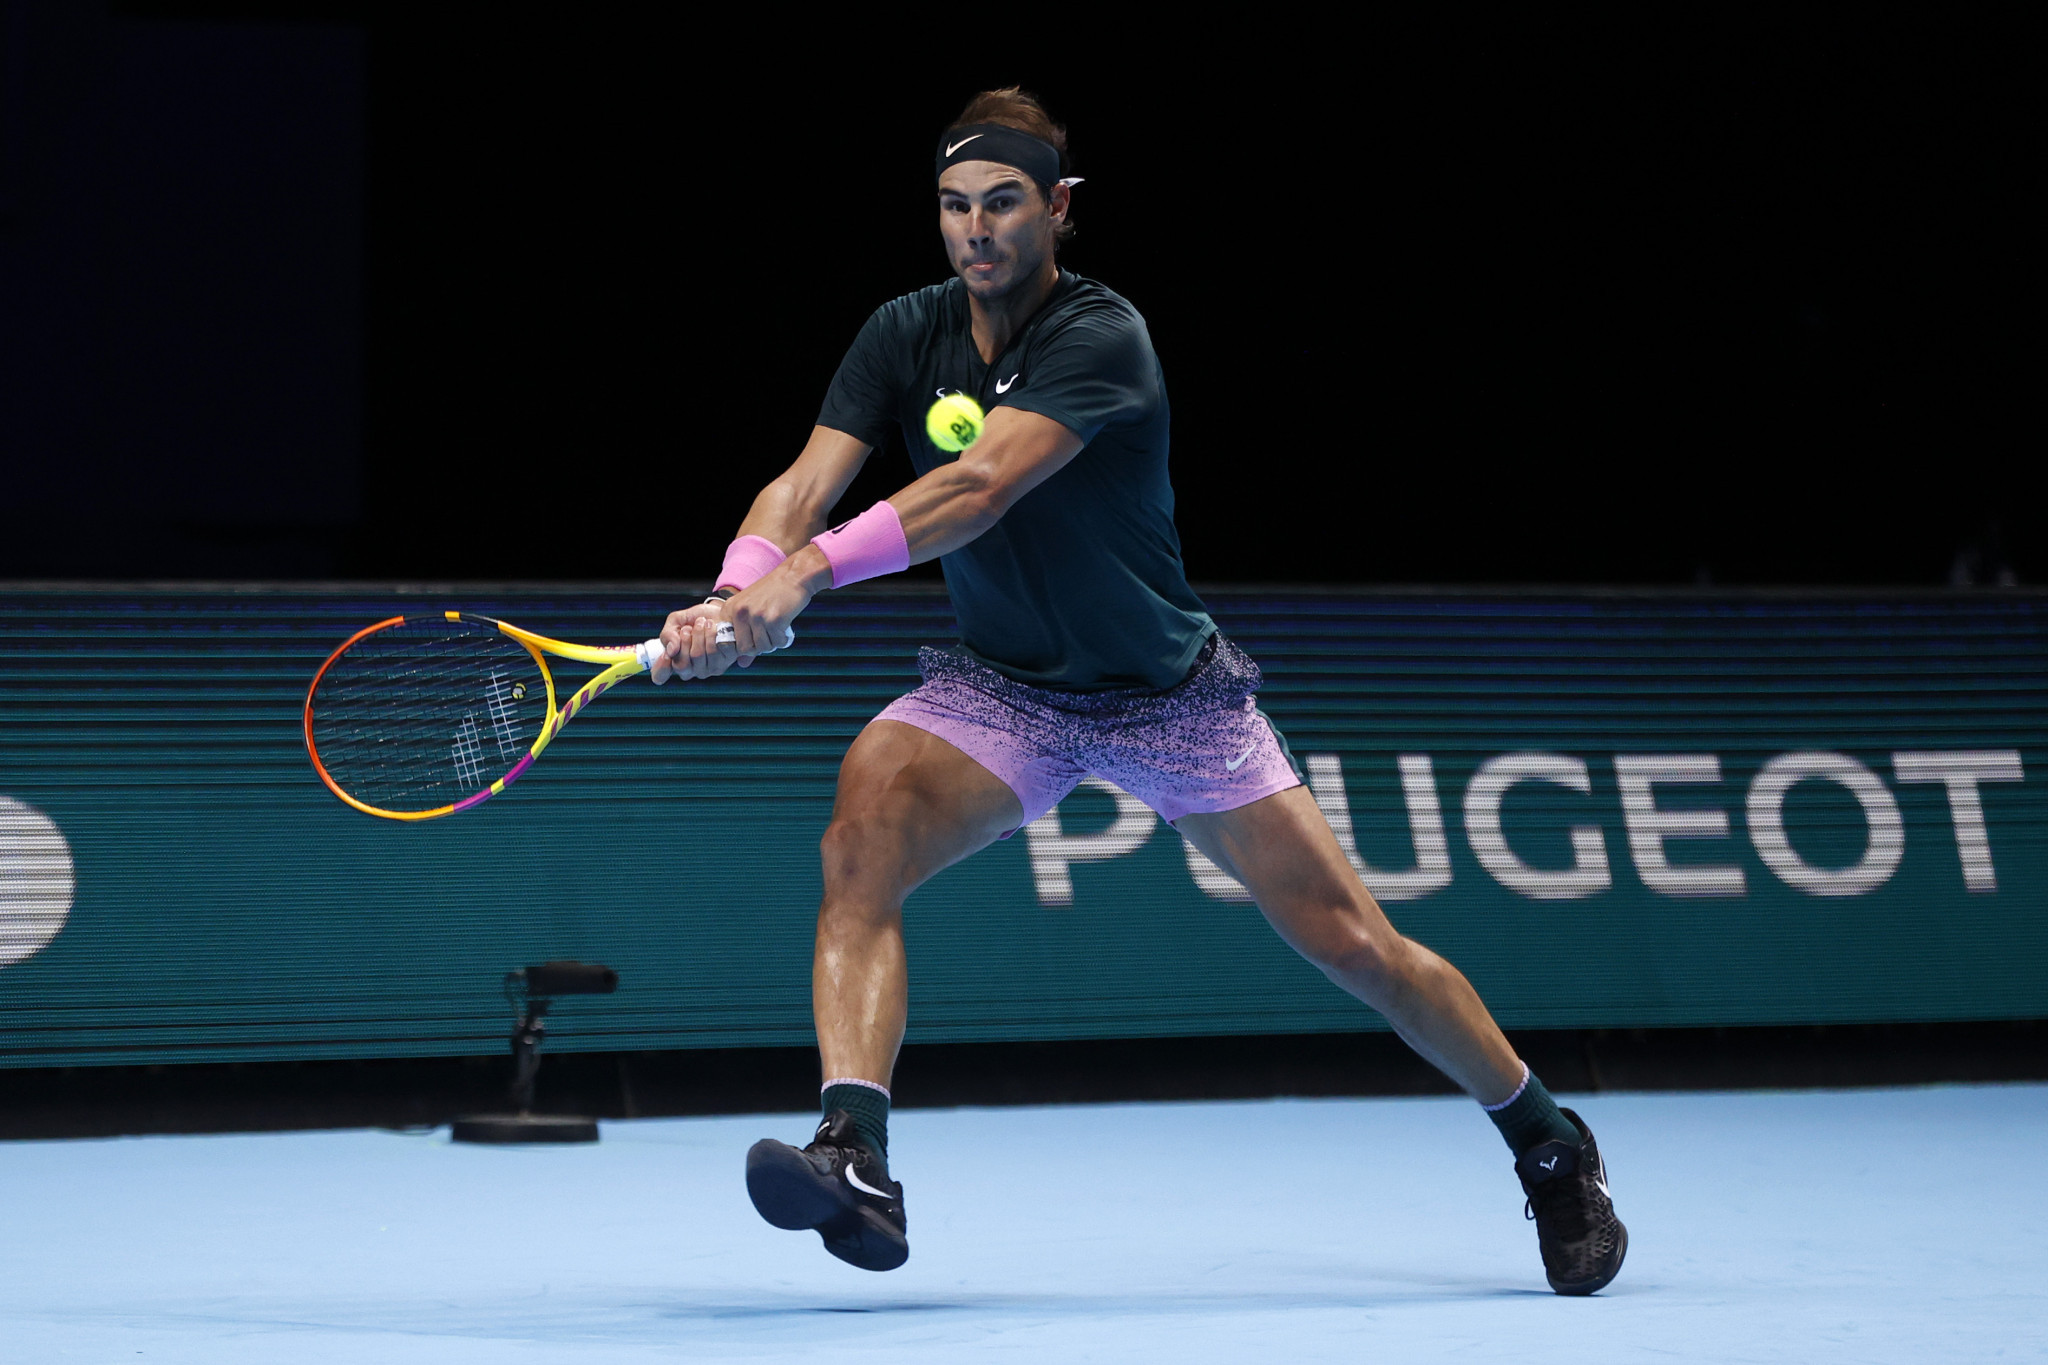 Nadal and Federer re-elected to ATP Player Council for 2021-2022